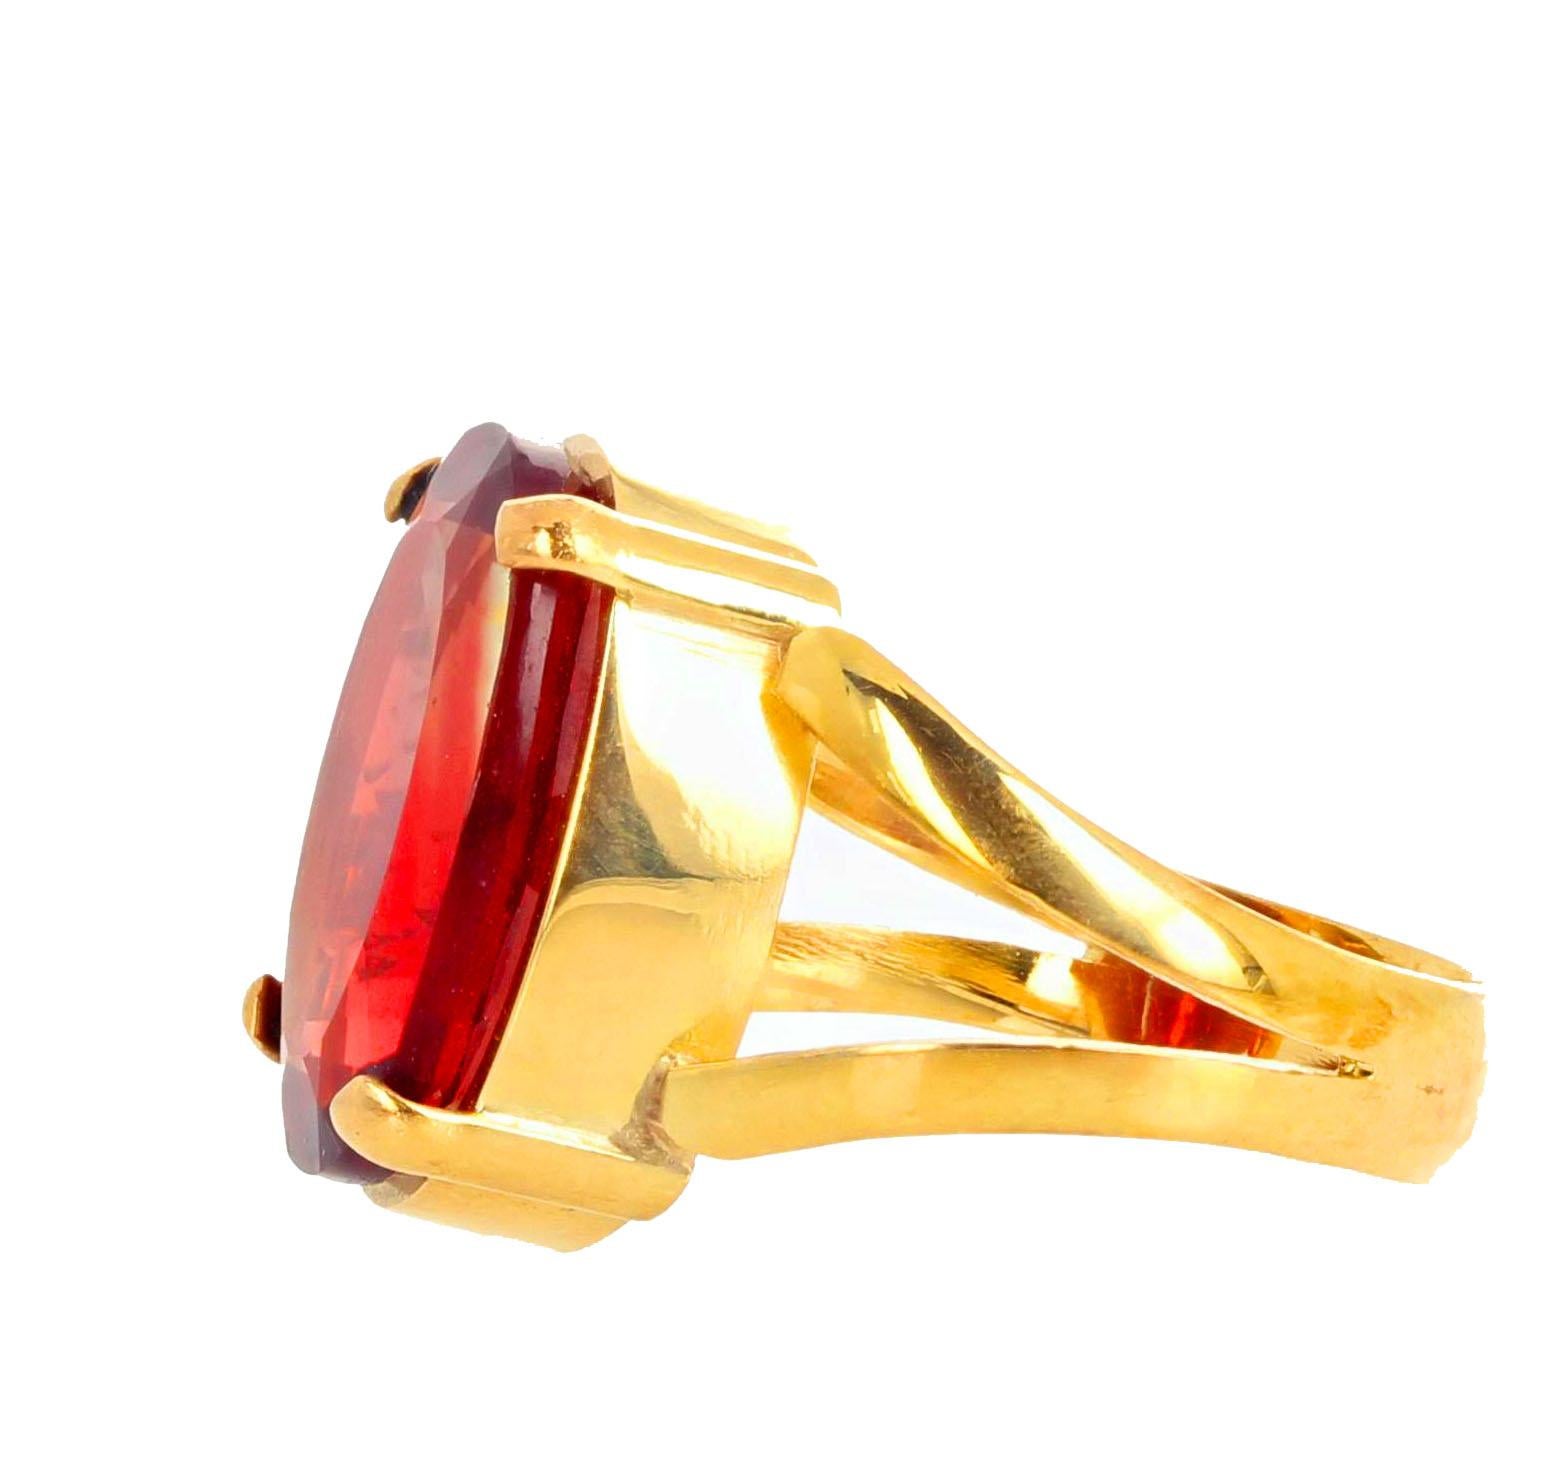 AJD Magnificent Rare Fiery Red Orange 8Ct Andecine 18Kt Yellow Gold Ring In New Condition For Sale In Raleigh, NC